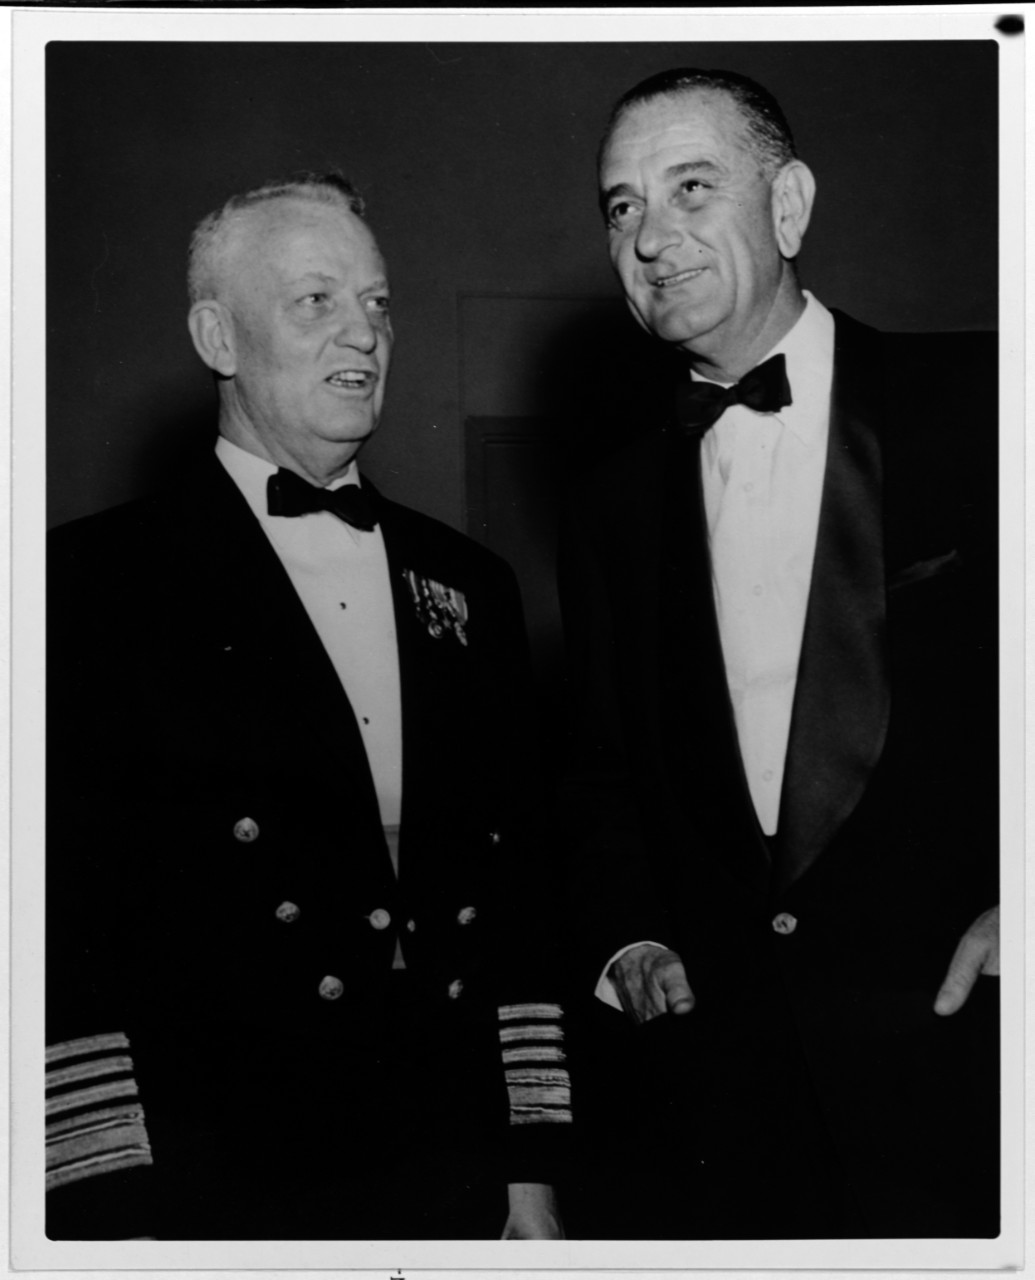 Admiral Arleigh A. Burke, USN, Chief of Naval Operations, with Vice President Lyndon B. Johnson